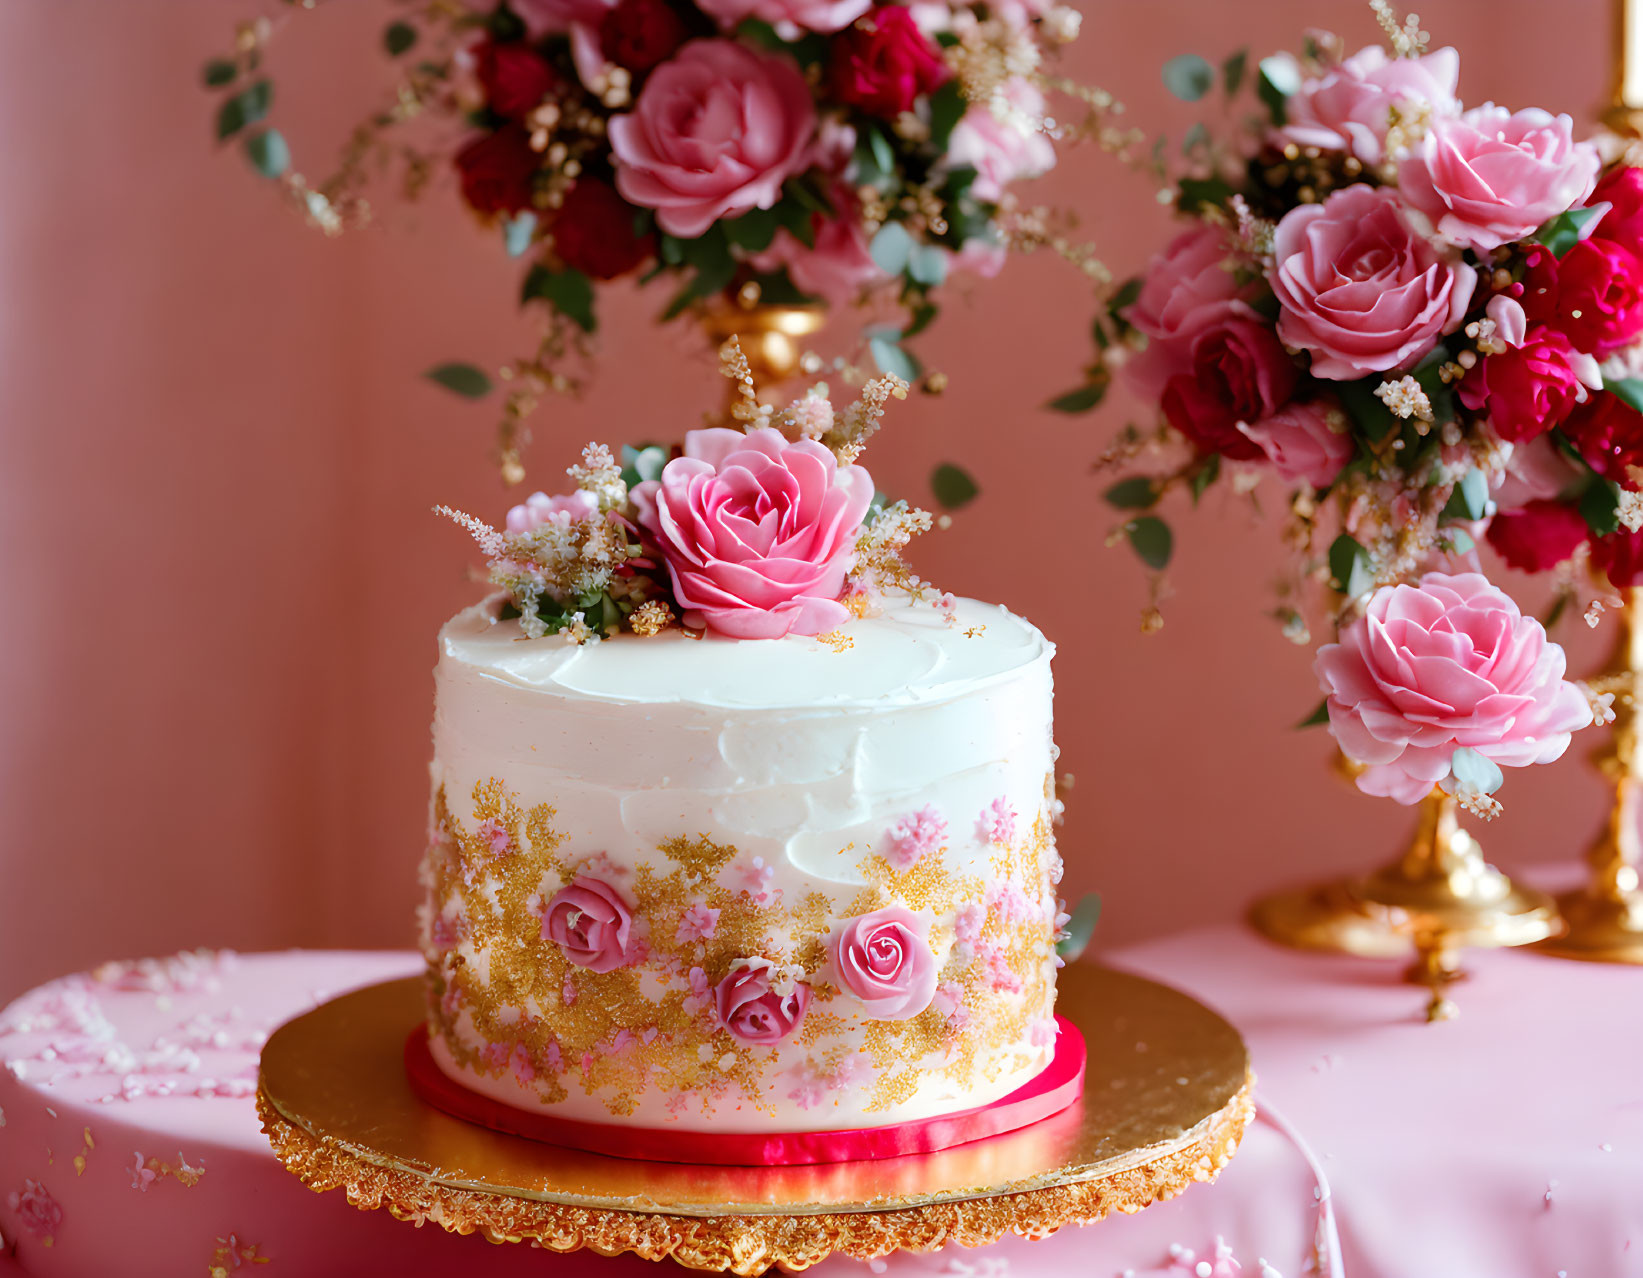 White and Gold Cake with Pink Roses and Floral Decor on Gold Stand